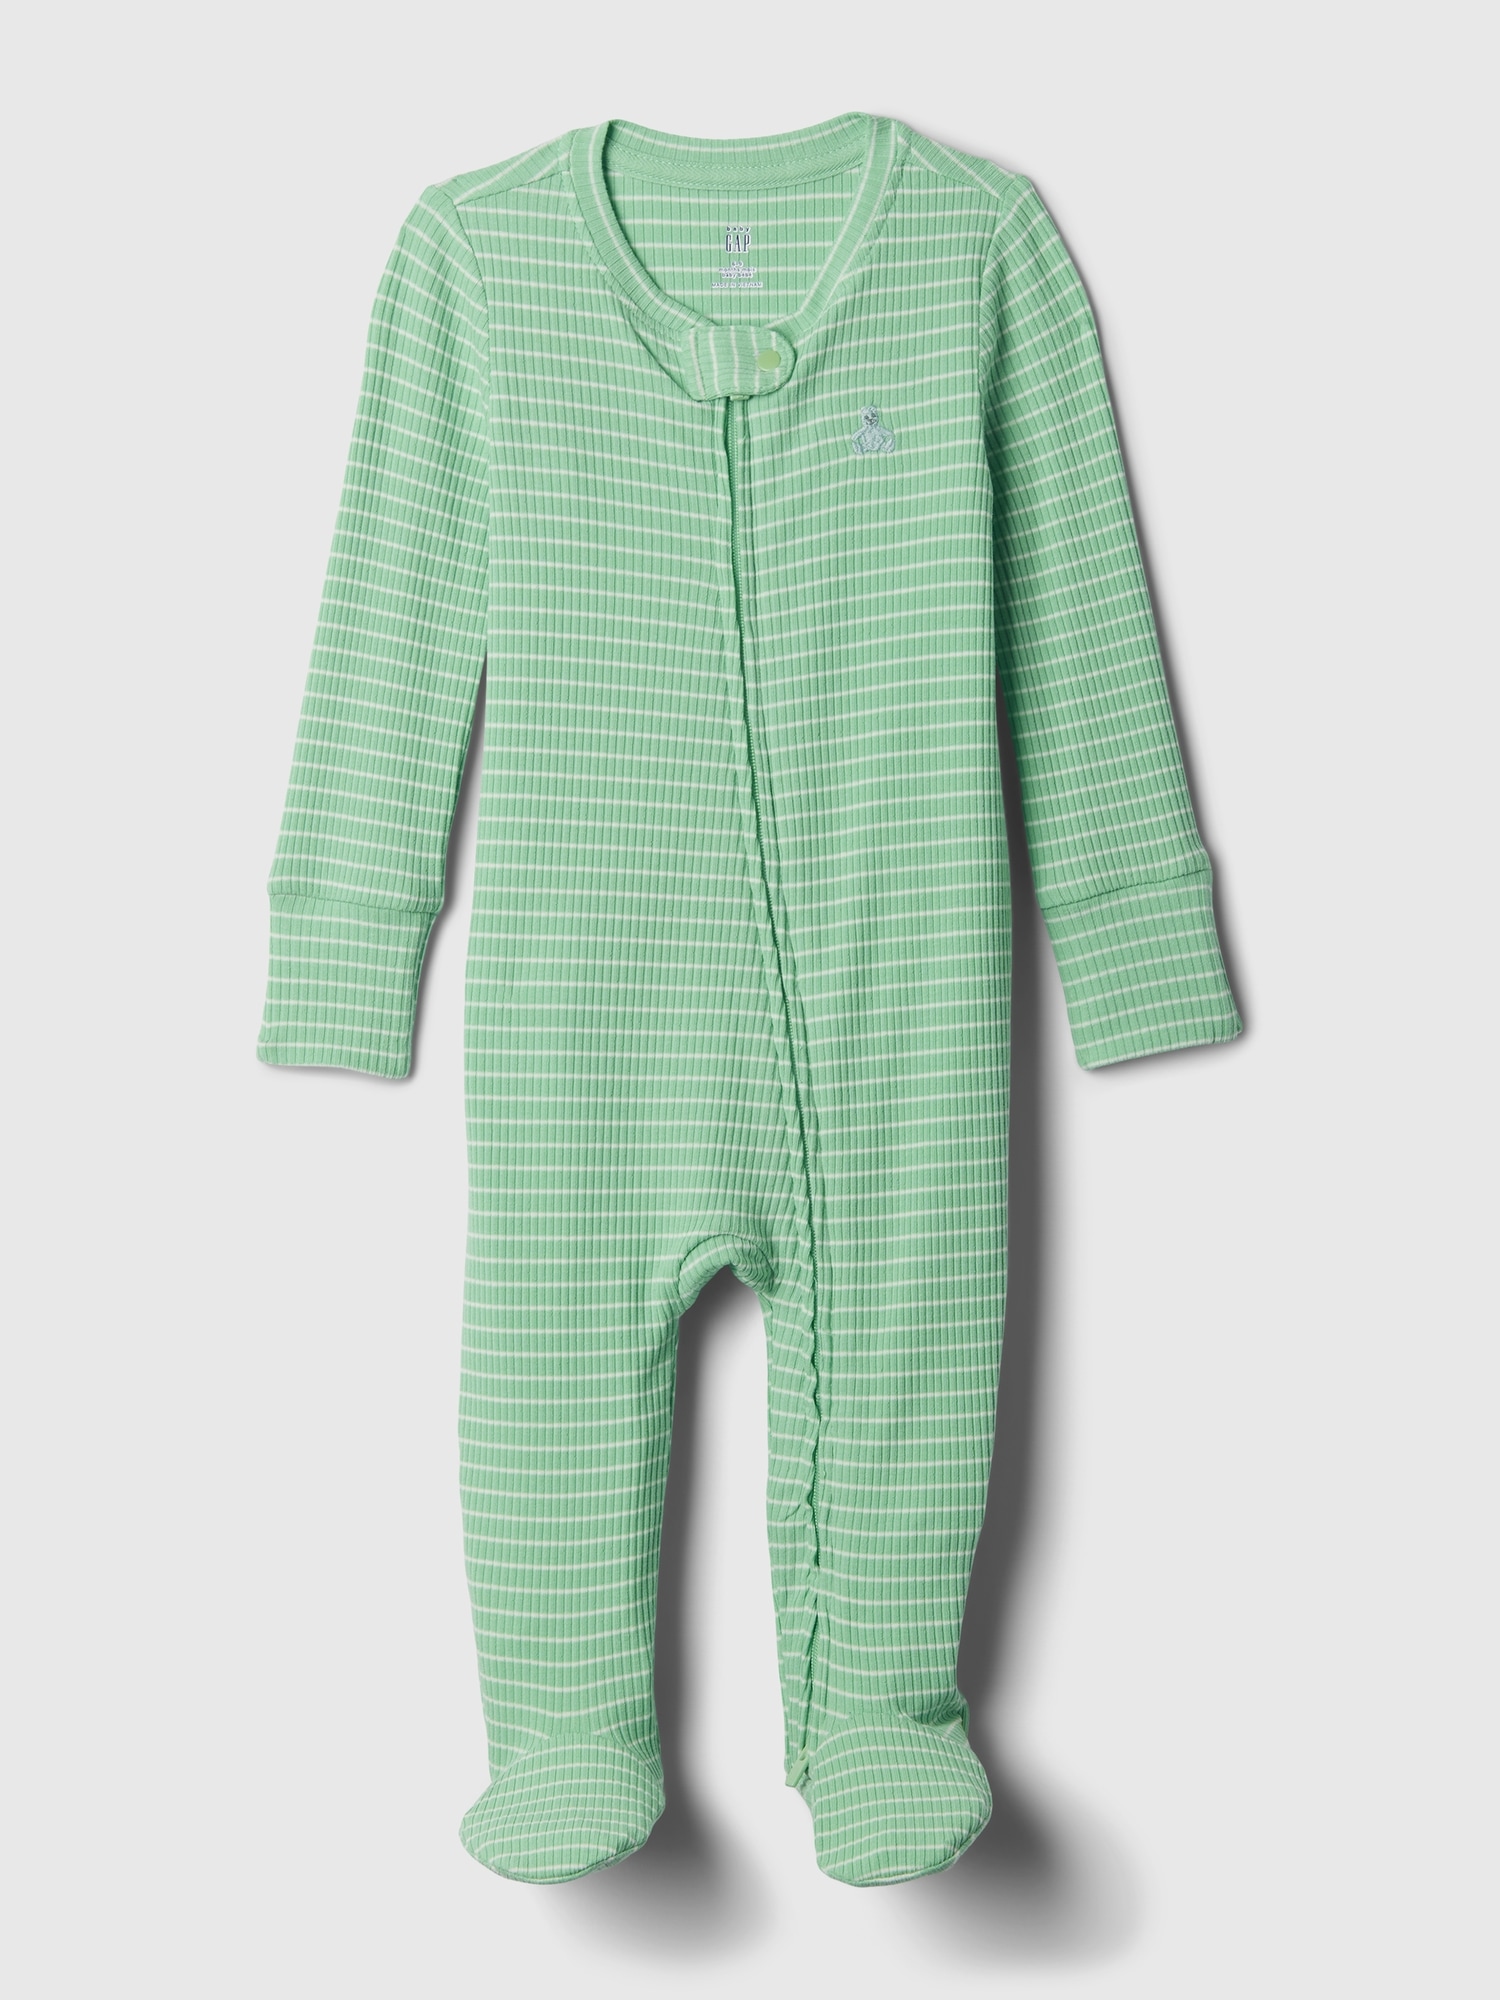 Gap Kids' Baby First Favorites Tinyrib Footed One-piece In Meadow Green